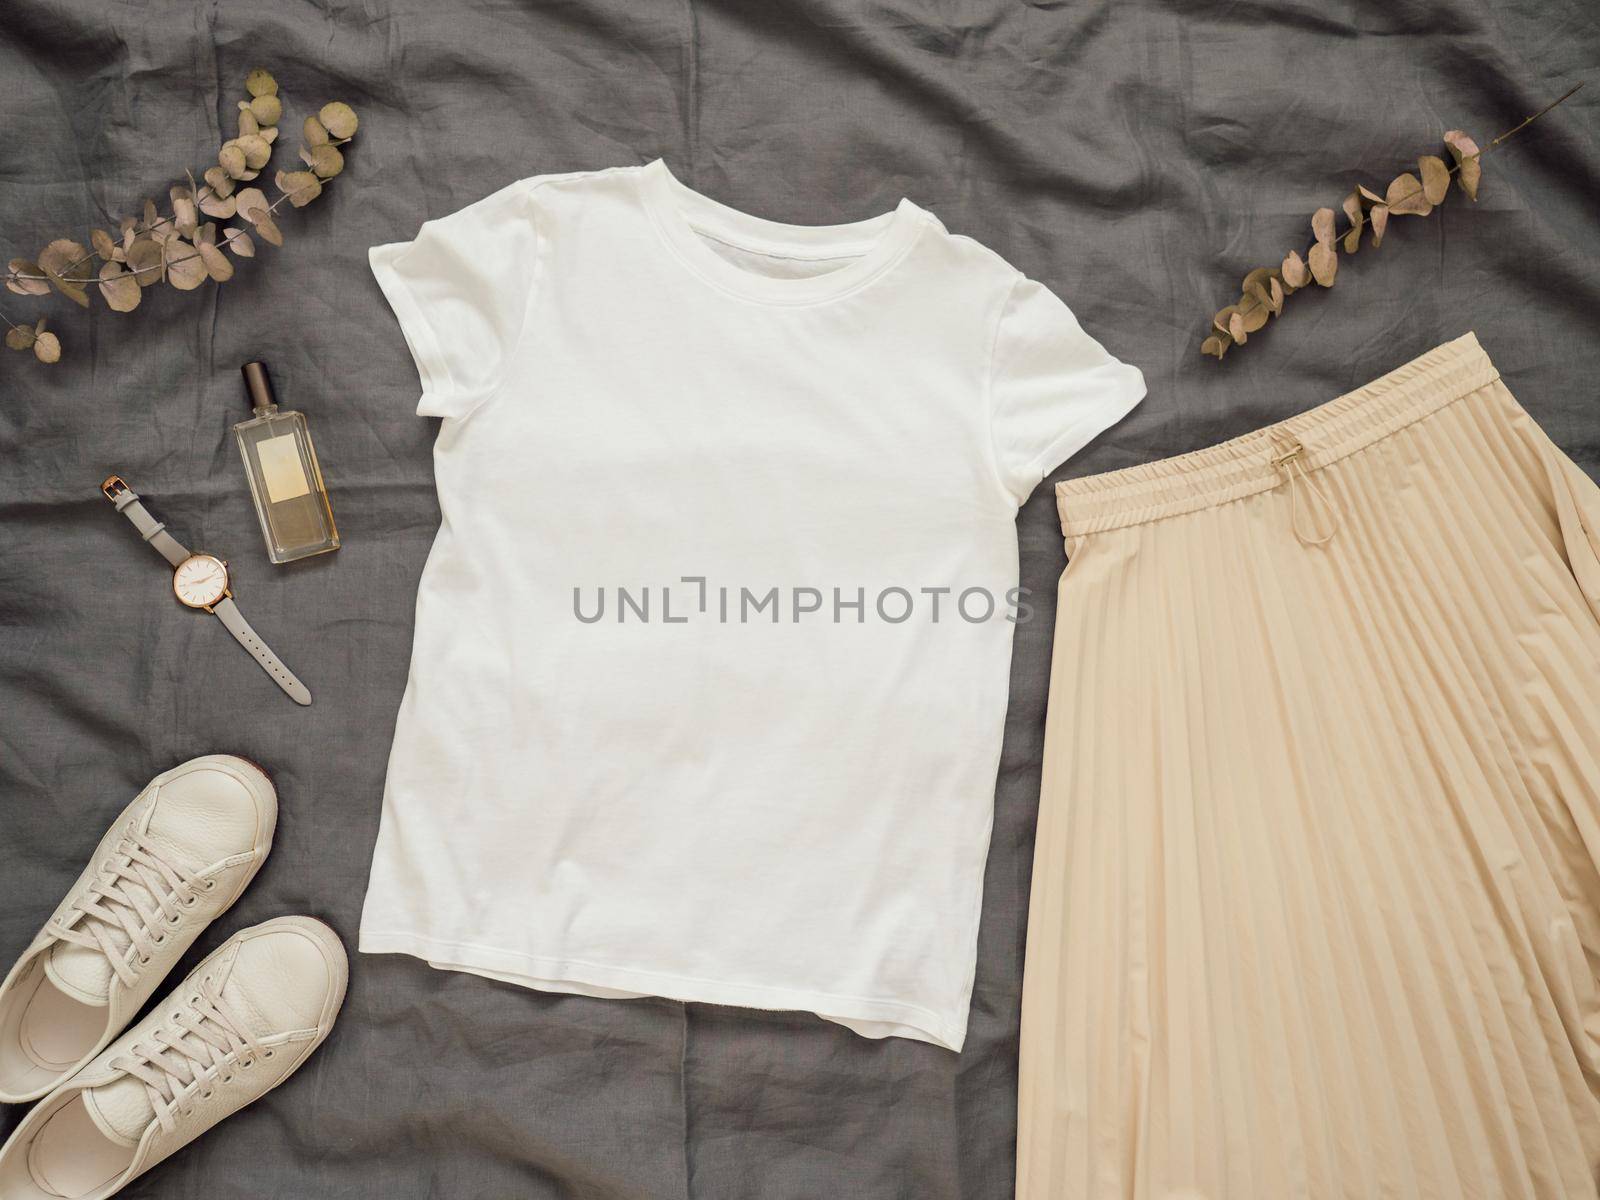 Fashionable female look with white empty t-shirt, cream pleated skirt and white sneakers. Top view of white blank t-shirt with short sleeves over gray bed linen. Mock up for t-shirt print design.